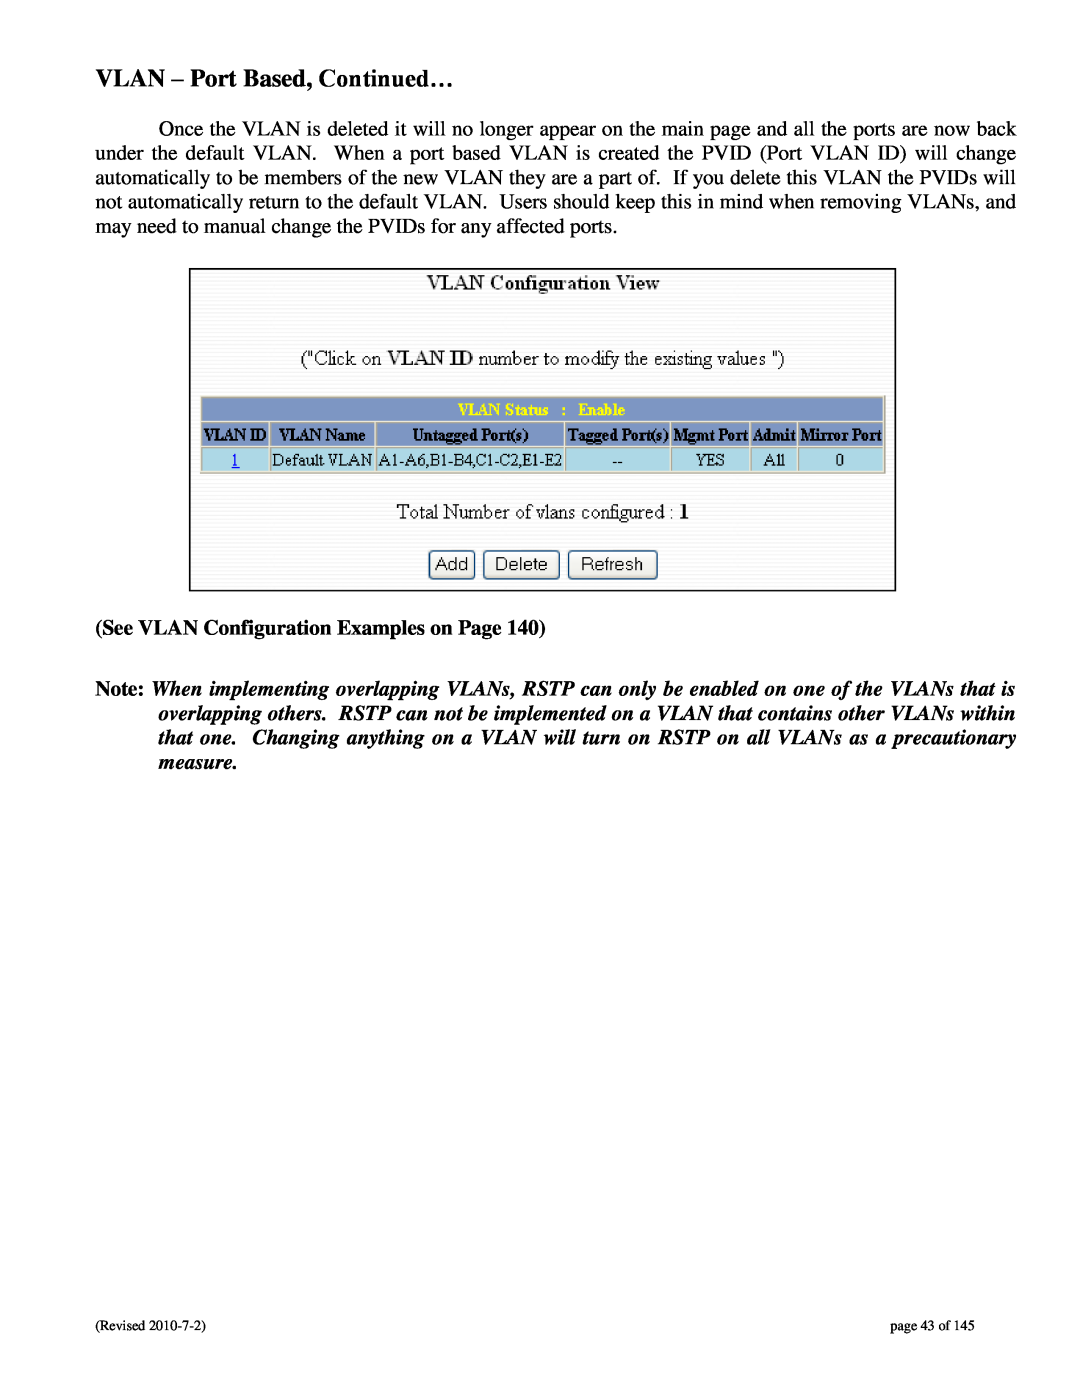 N-Tron 9000 user manual VLAN - Port Based, Continued…, See VLAN Configuration Examples on Page, page 43 of 